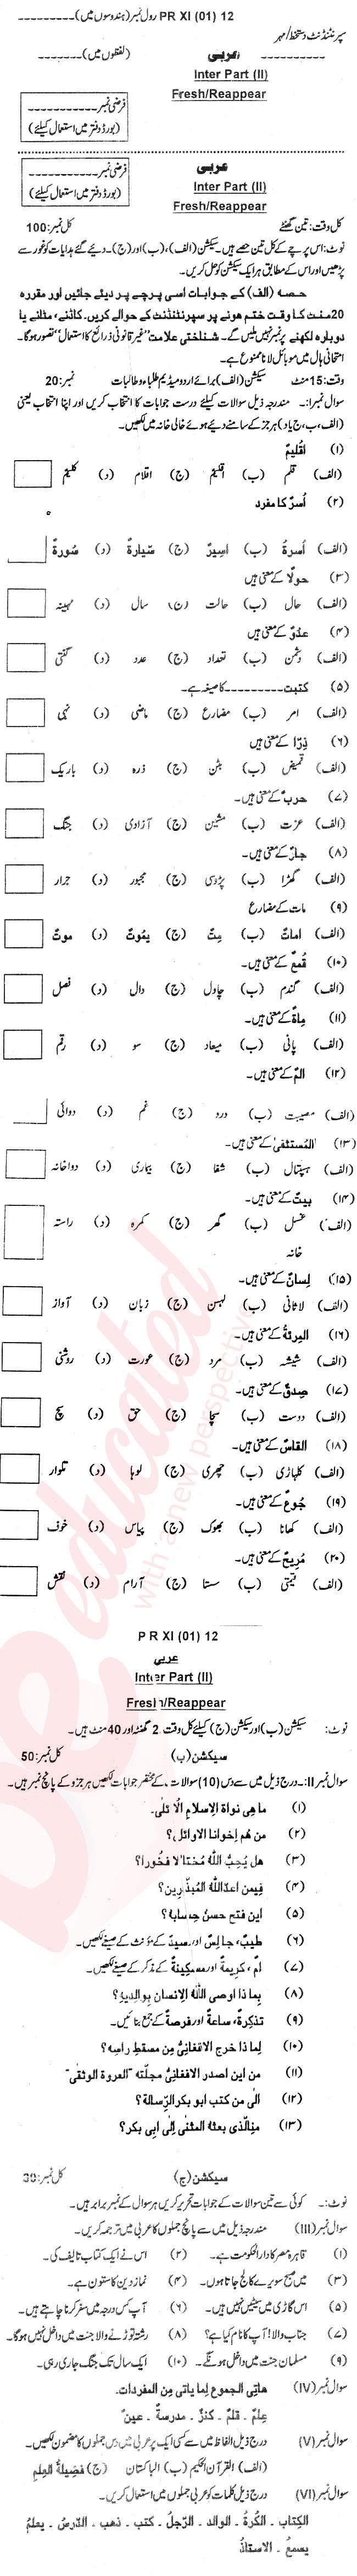 Arabic FA Part 2 Past Paper Group 1 BISE Malakand 2012